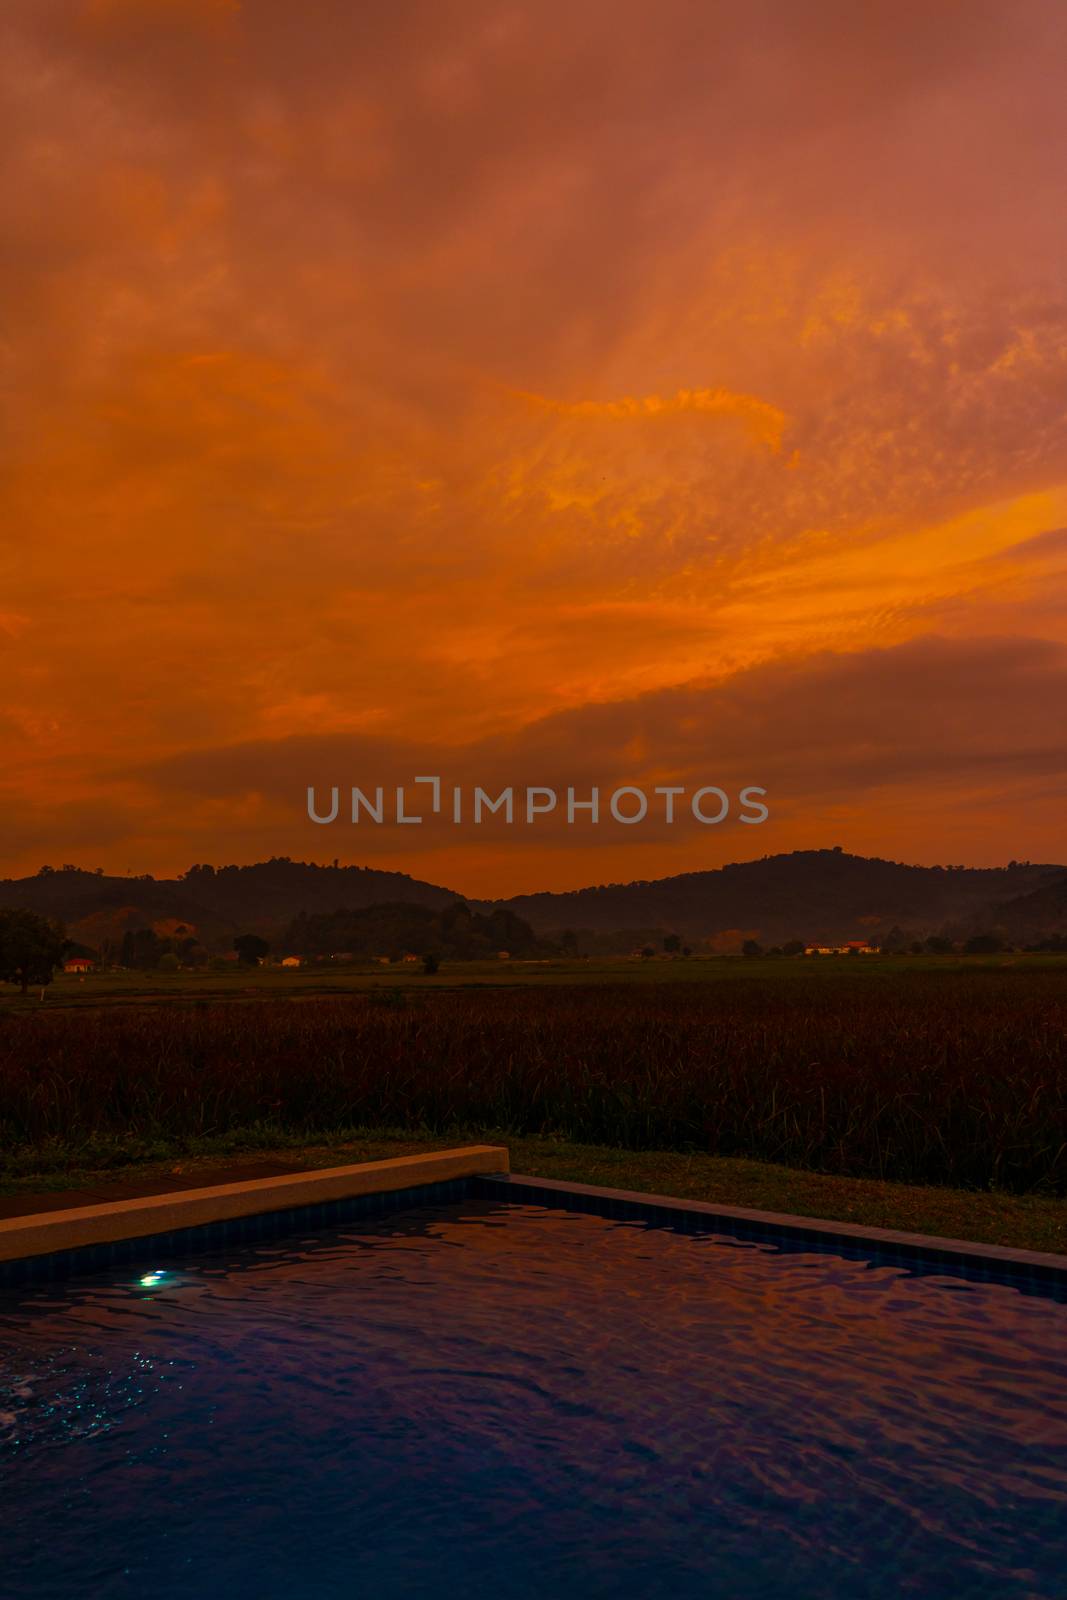 Unusual orange fiery sunset in the tropics. View from the pool to a rice field and mountains.